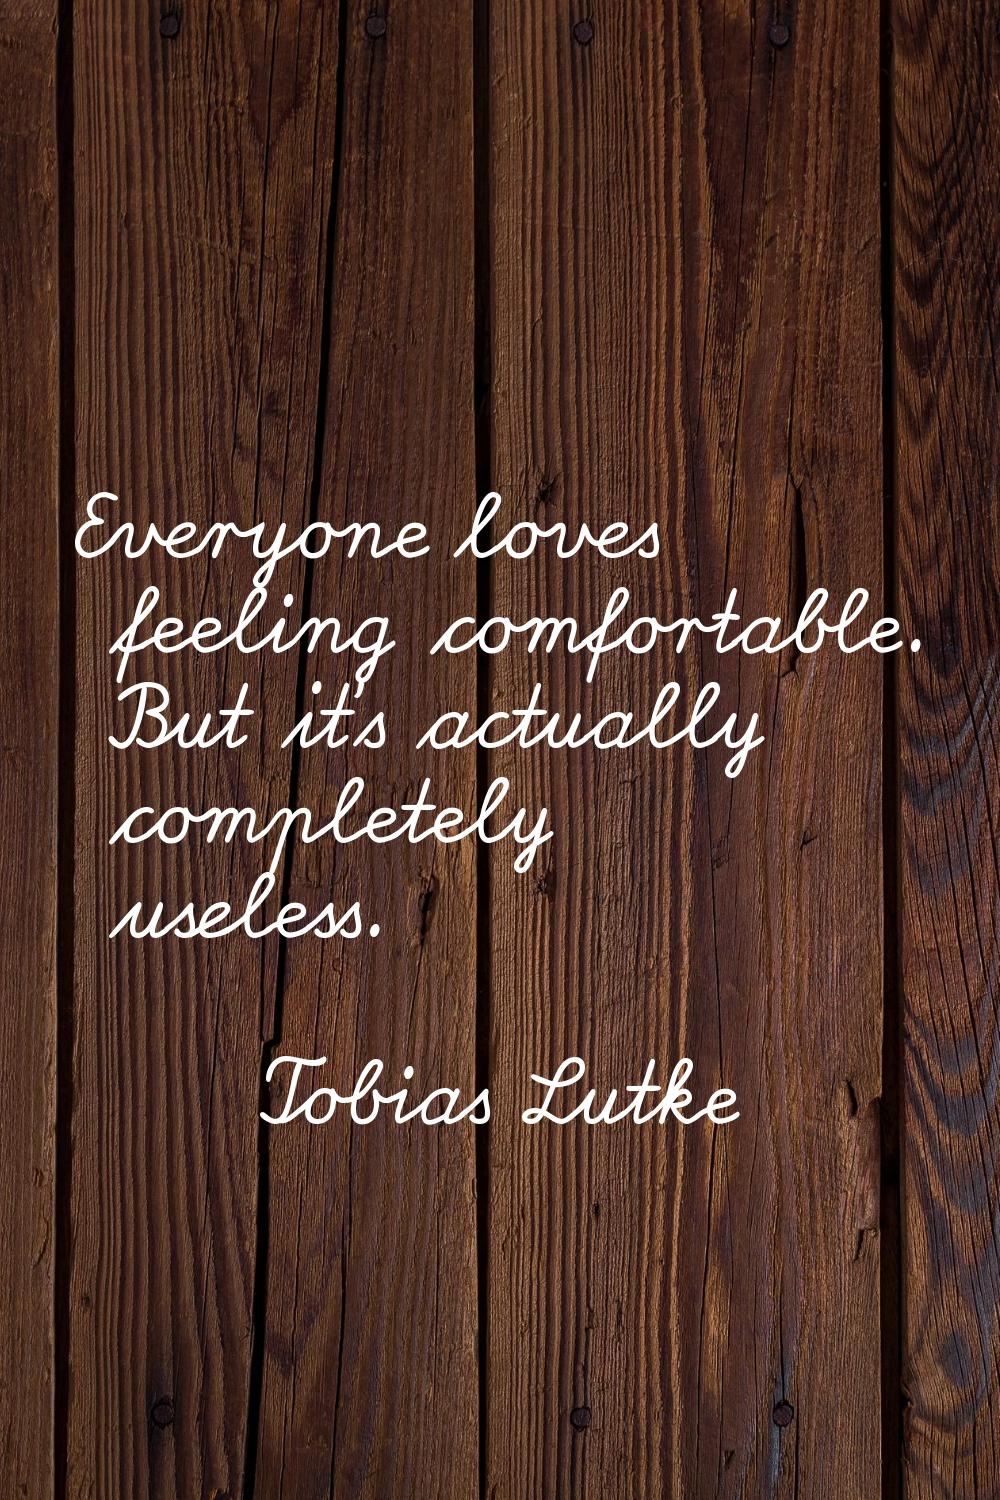 Everyone loves feeling comfortable. But it's actually completely useless.